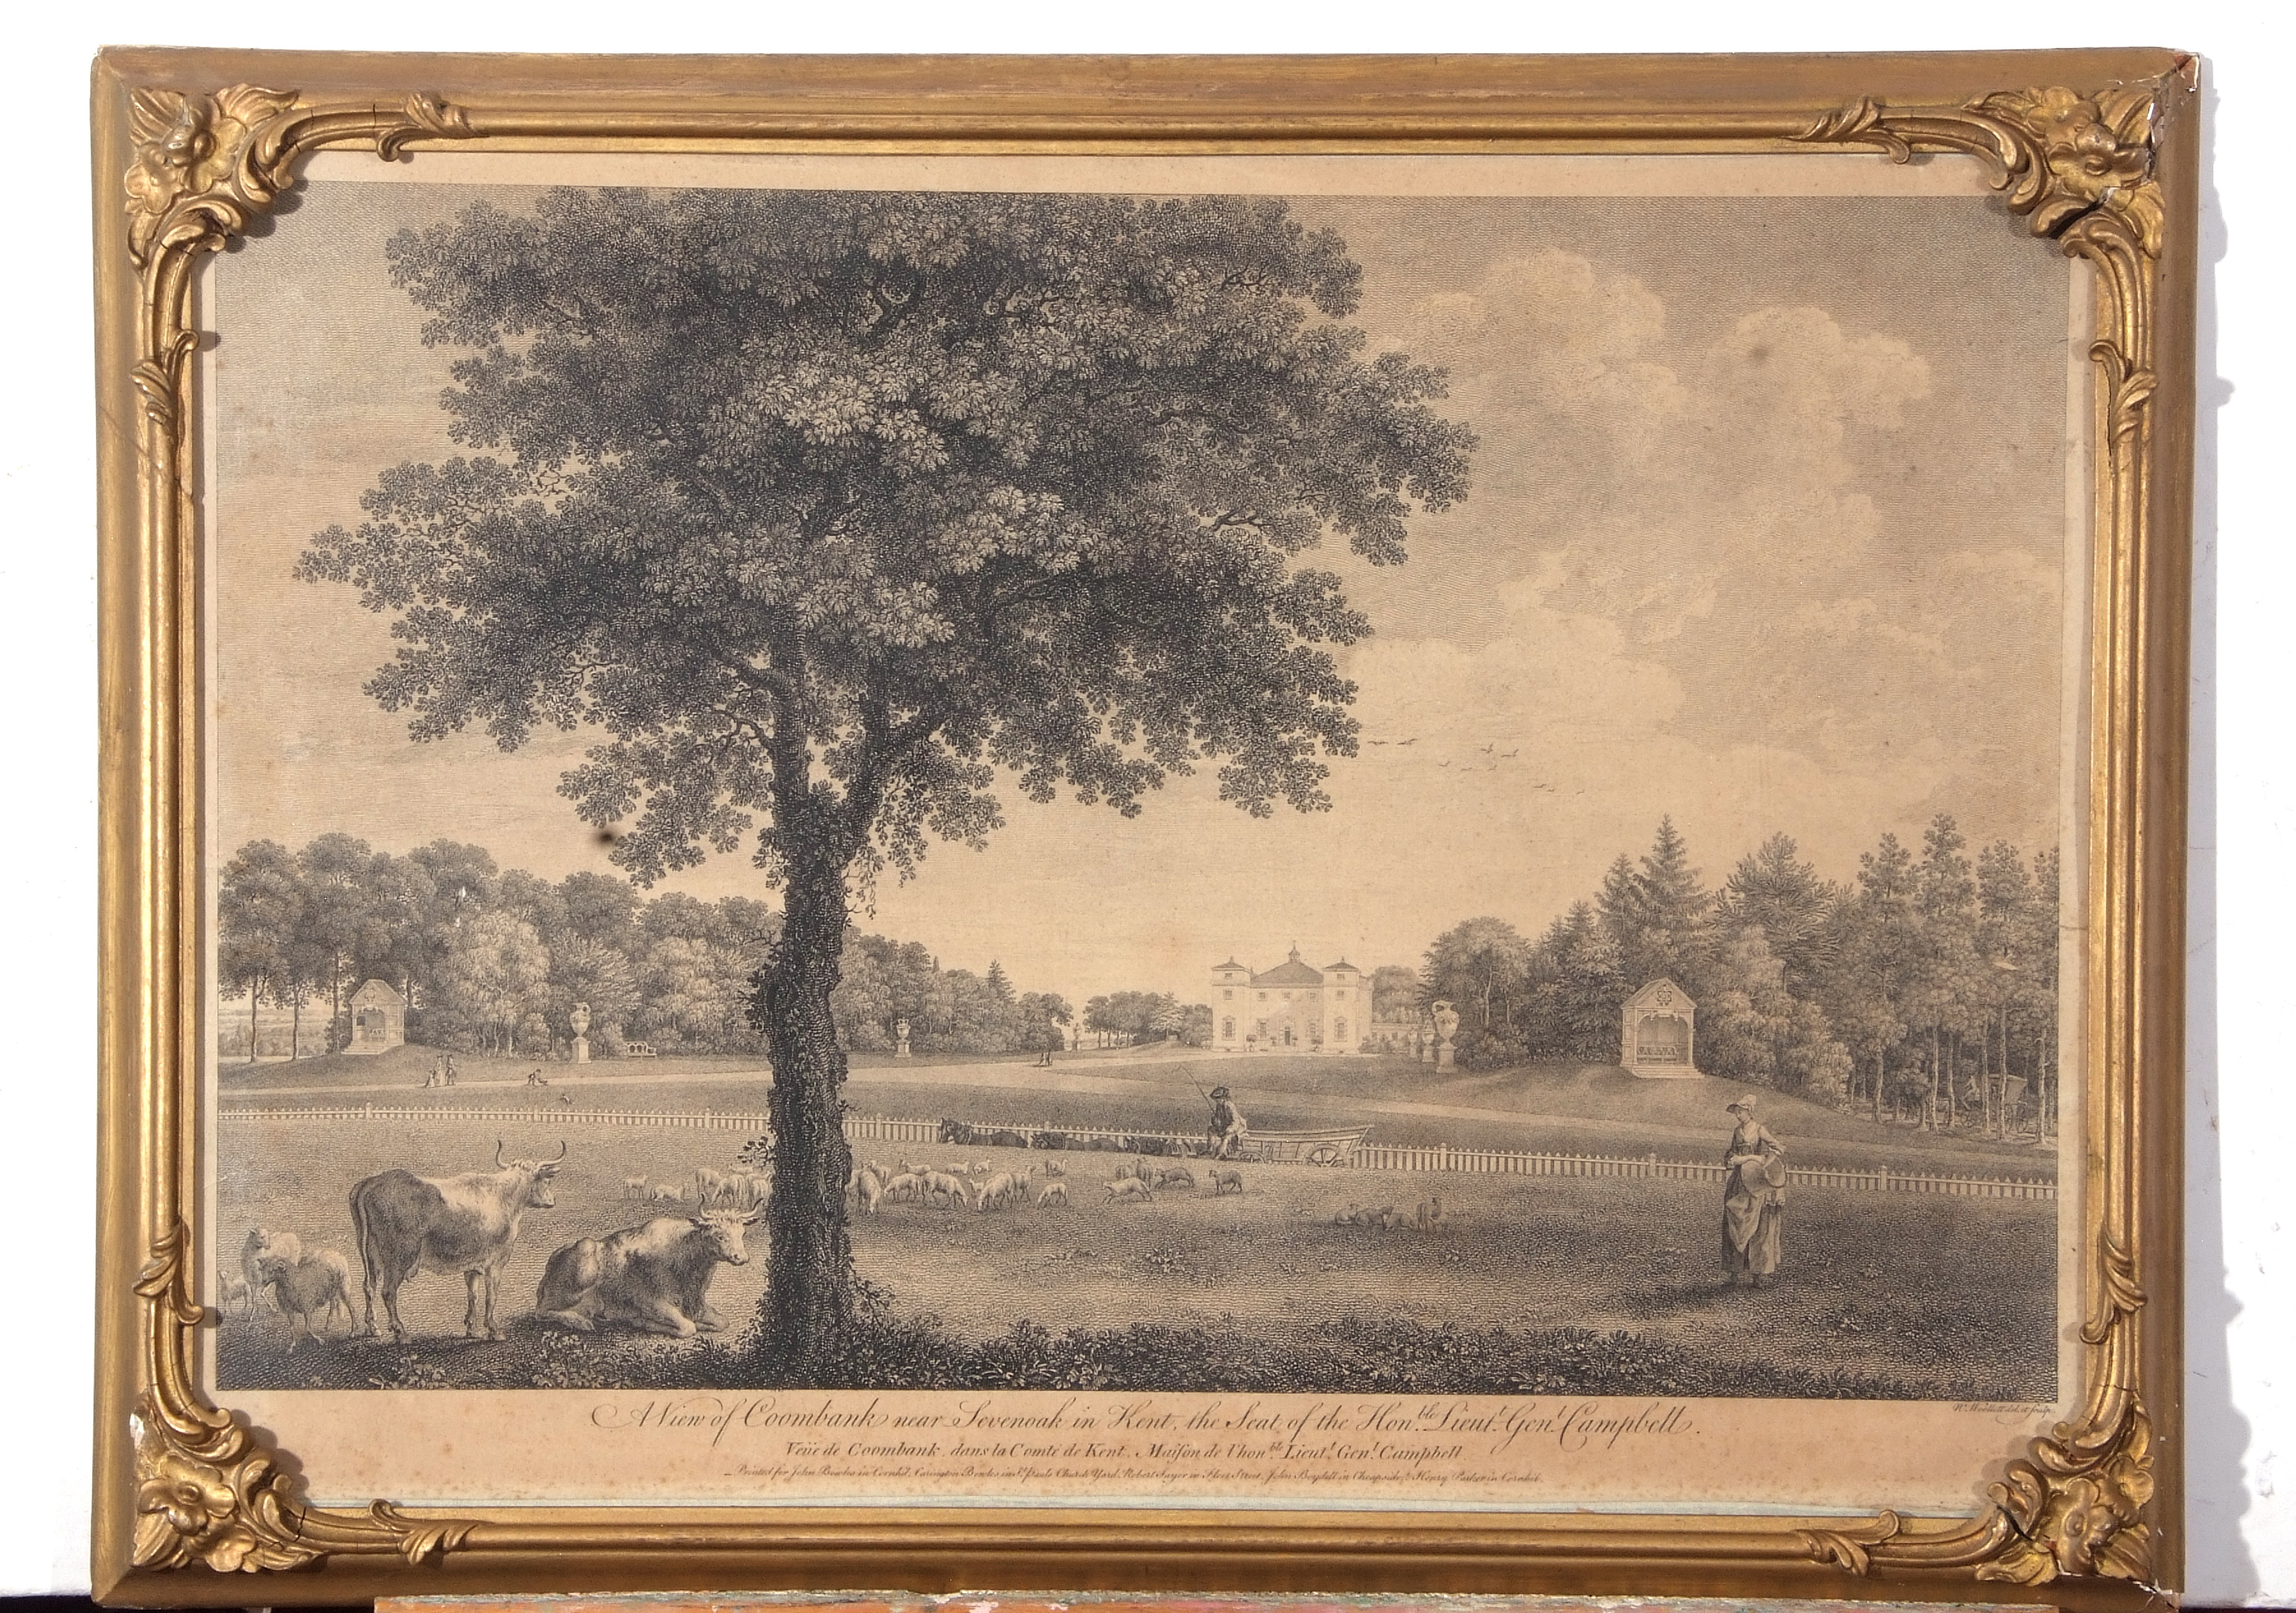 Engraving "A view of Coombank near Sevenoaks in Kent", c. early 19th century, 37 x 52cm